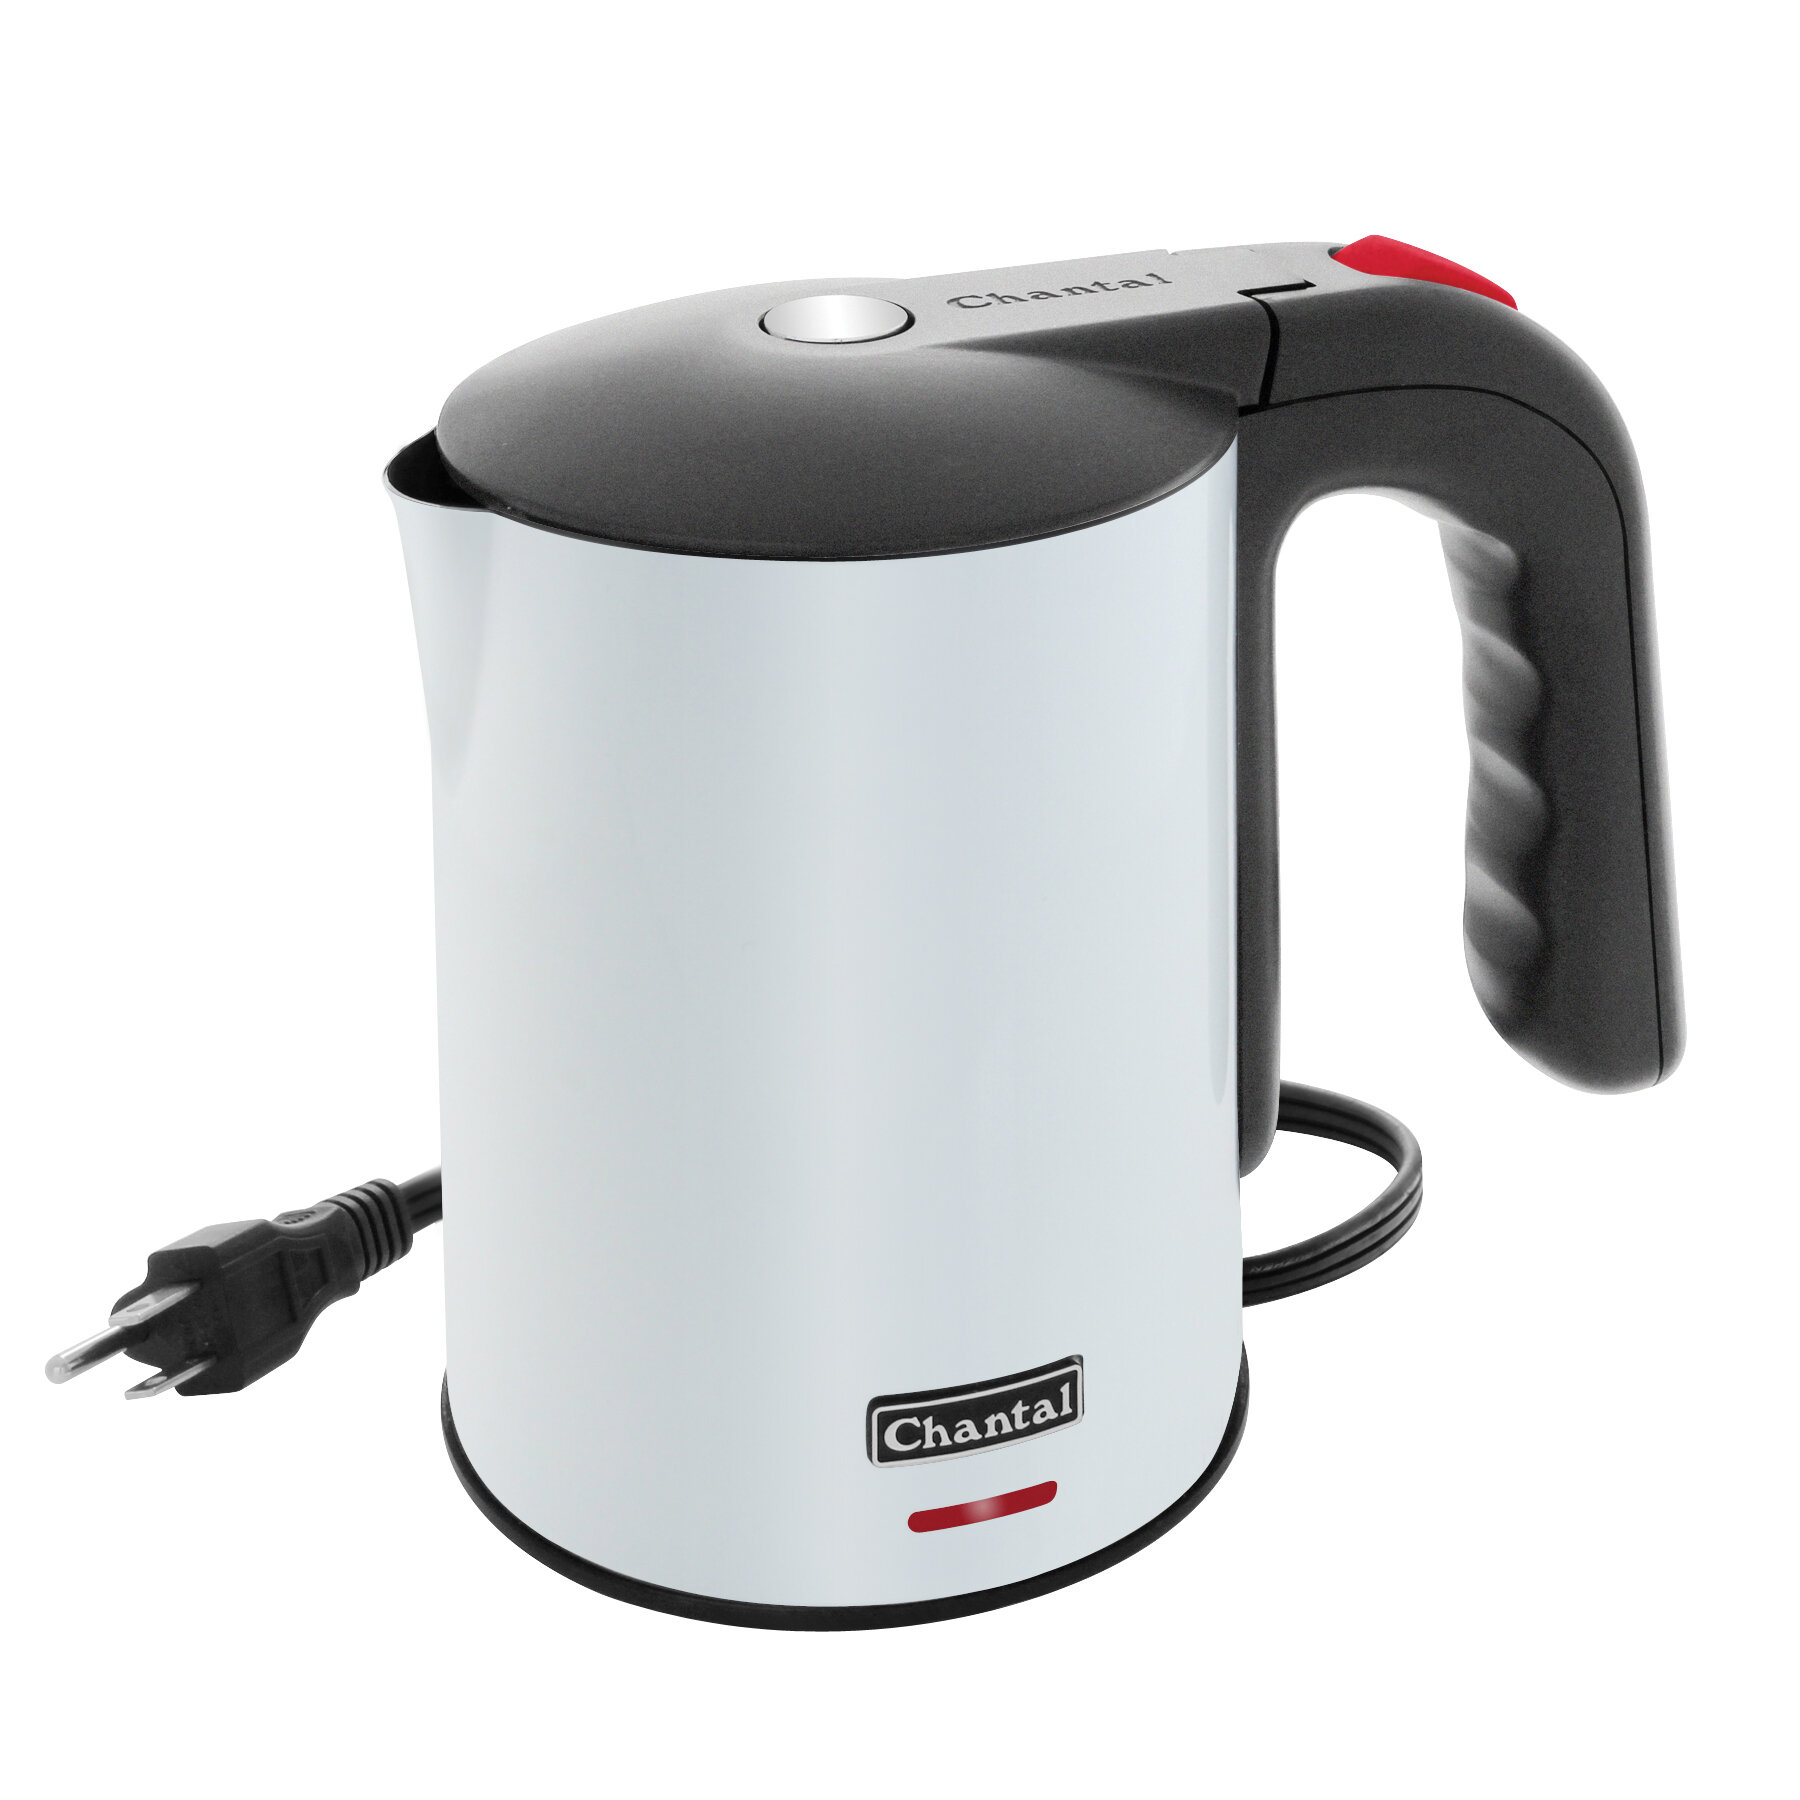 Ovente 1.7L Cleo Collection Electric Kettle with Boil-Dry Protection